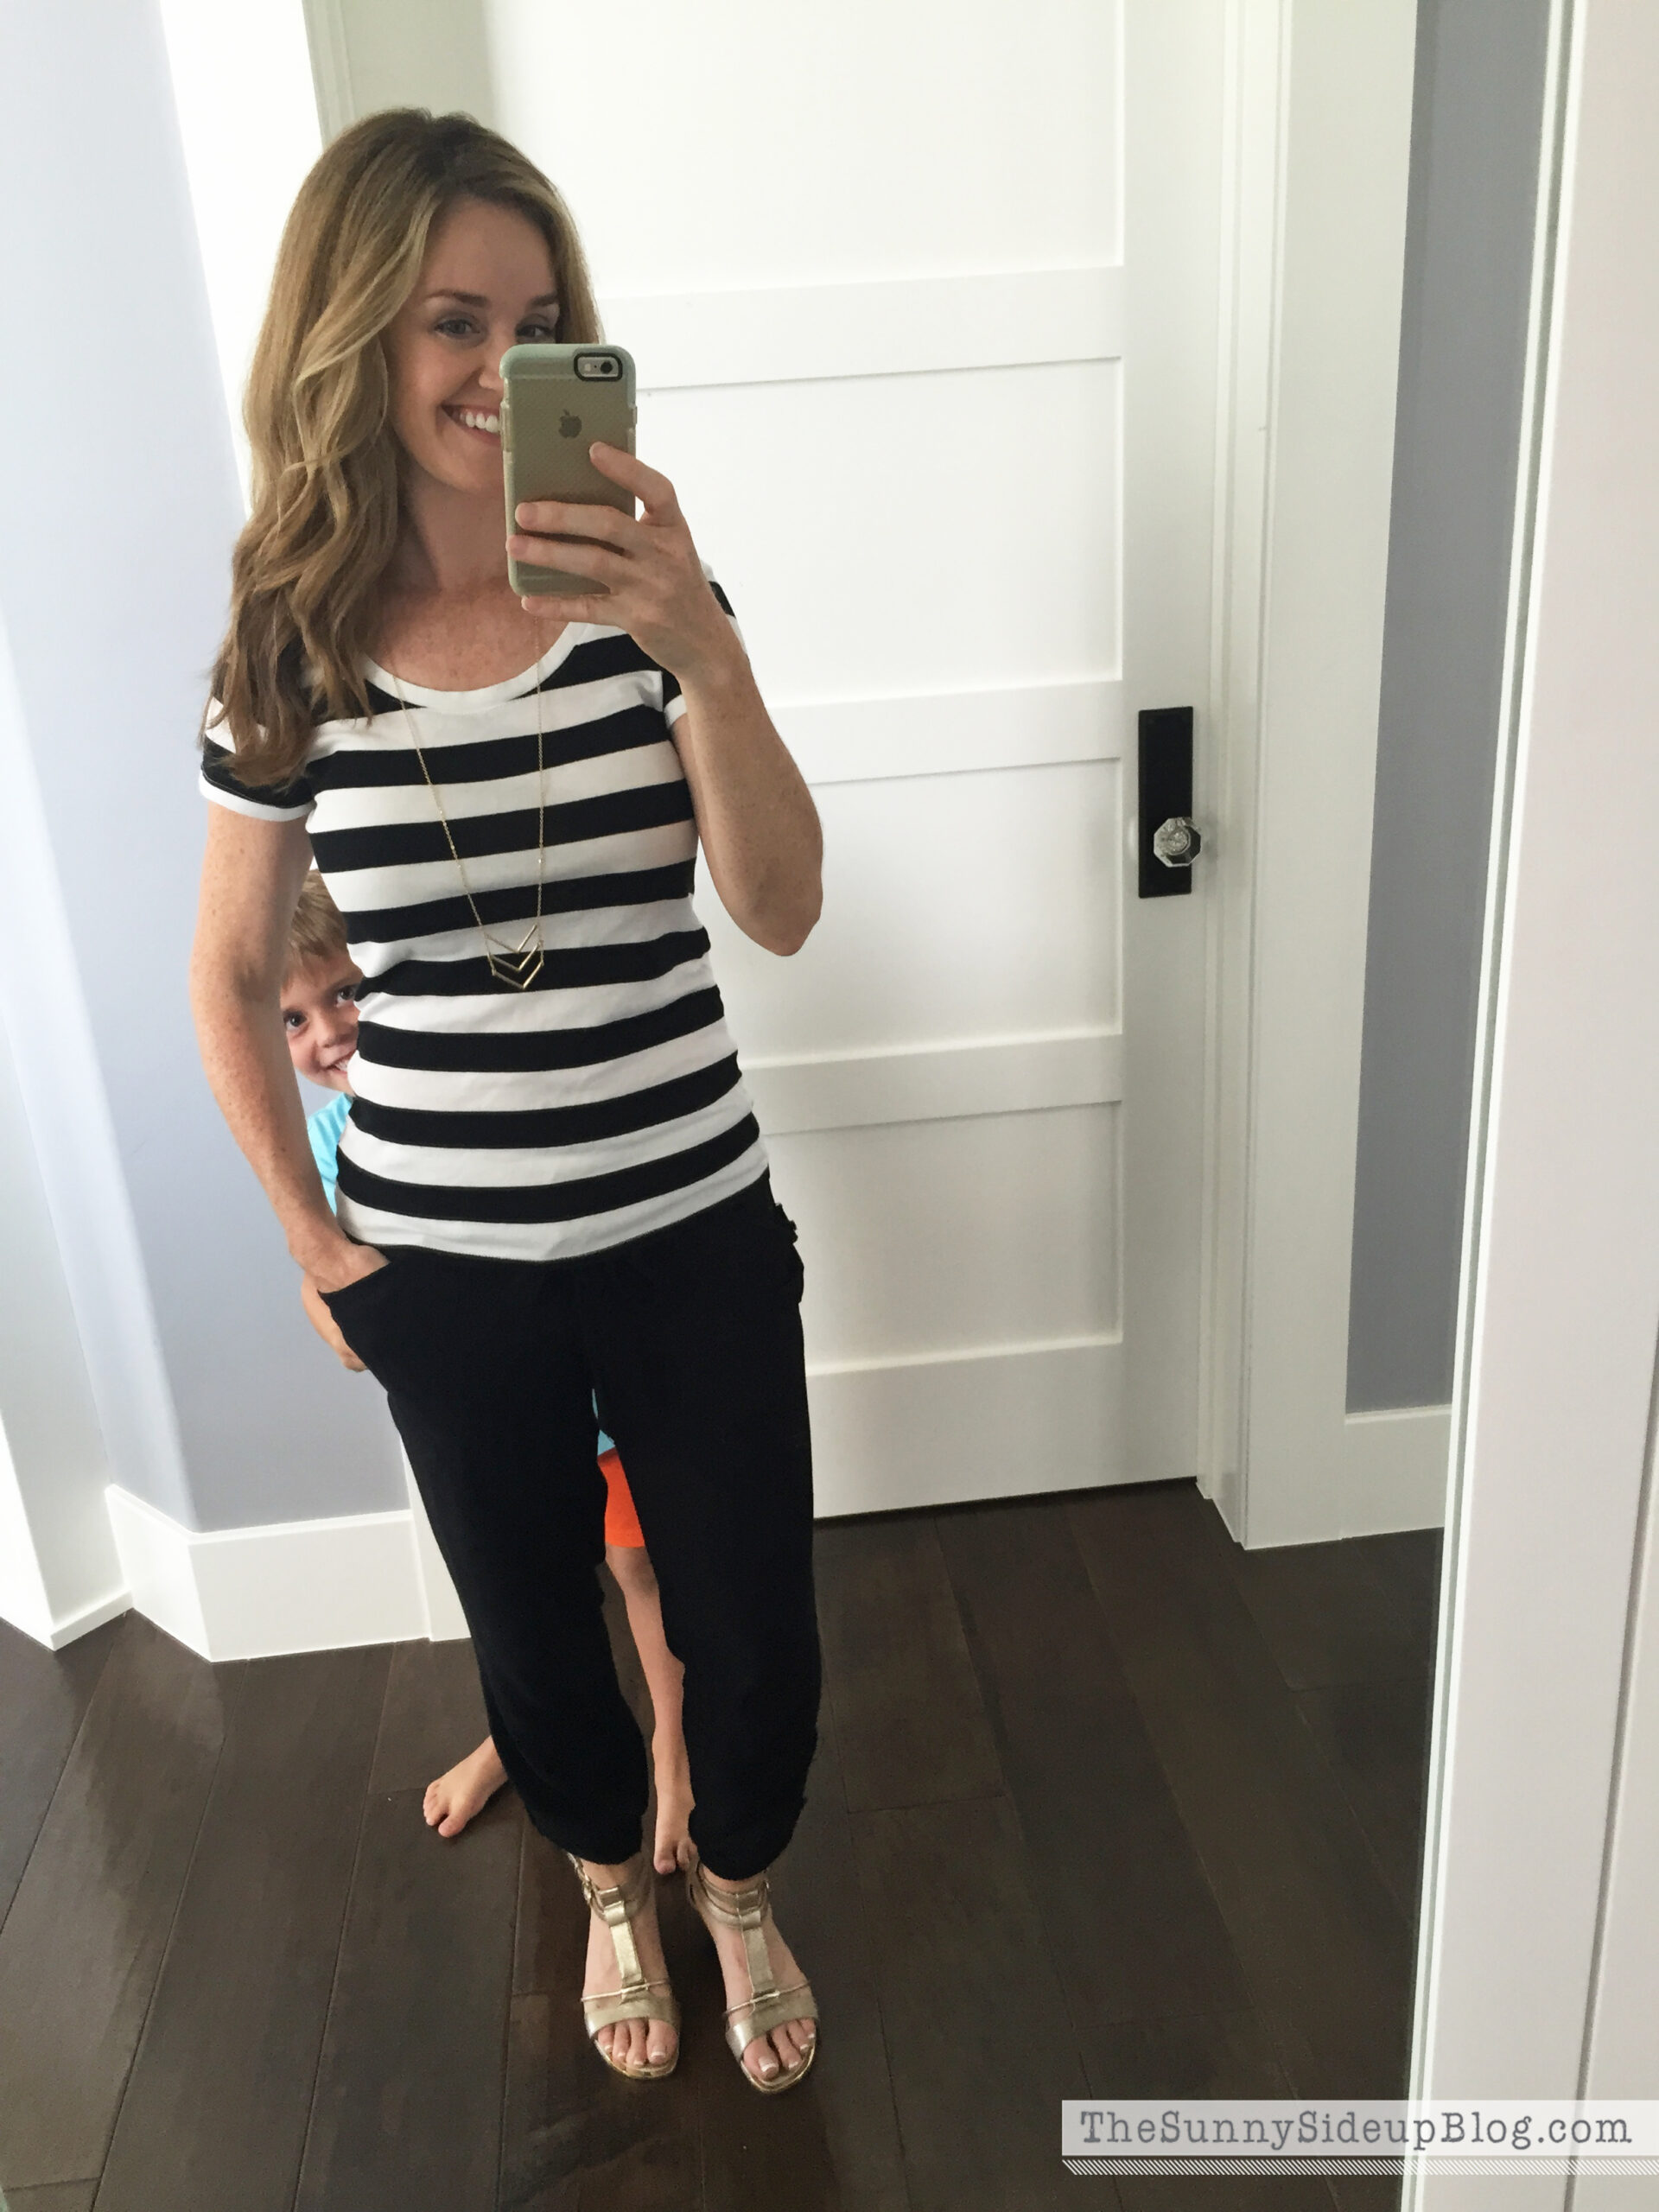 Fashion Friday - stripes and green! - The Sunny Side Up Blog